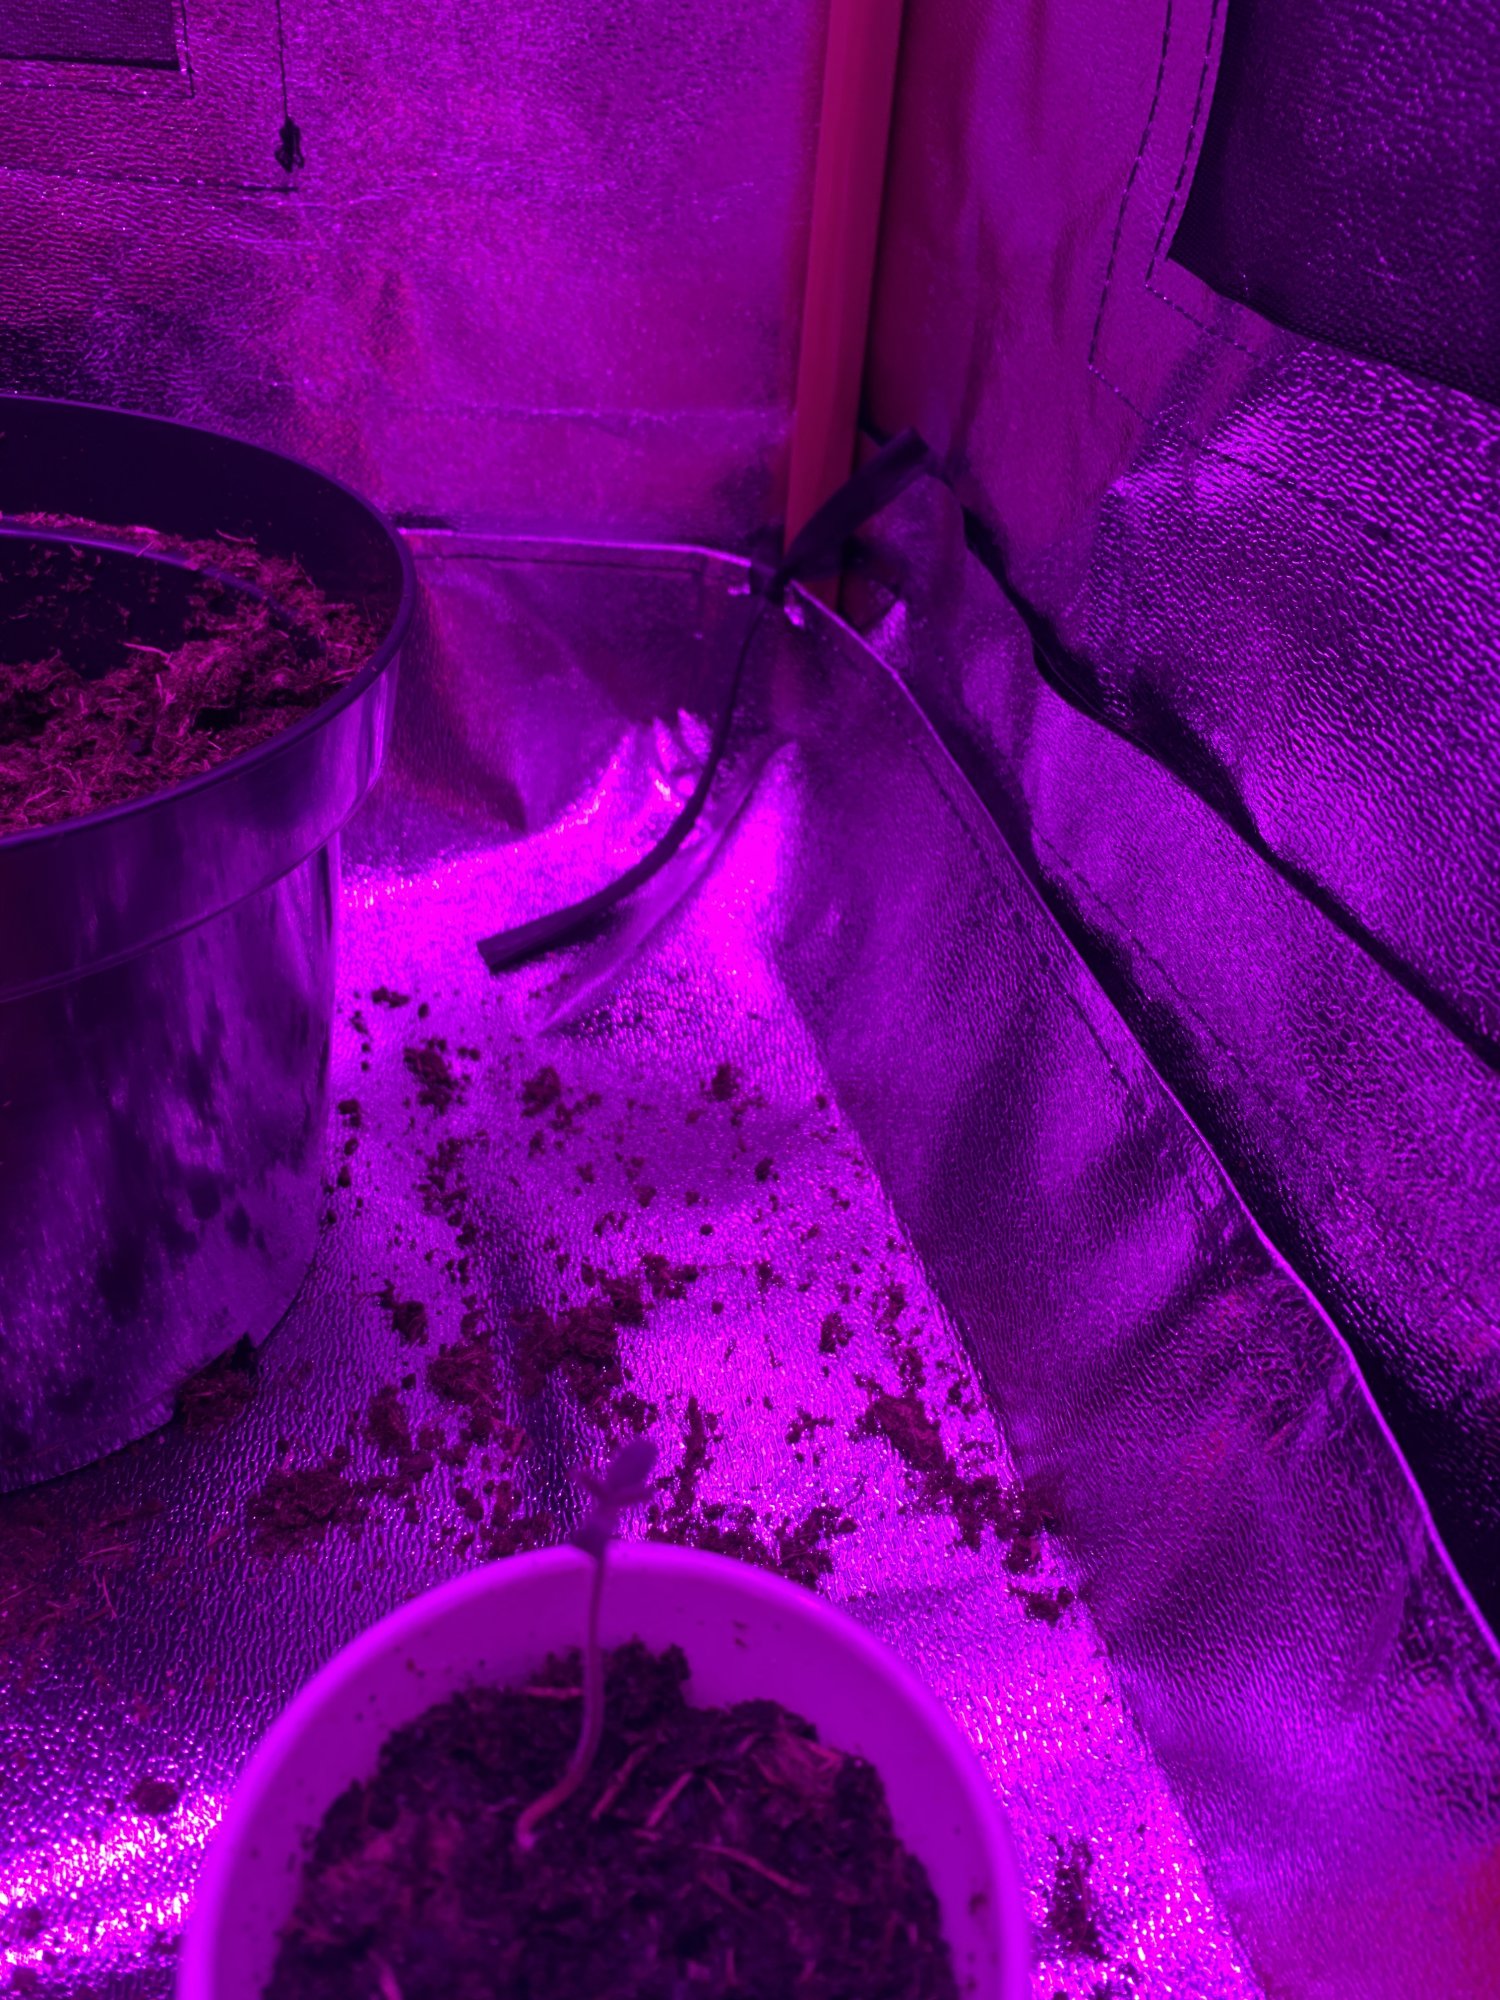 First timer growing 3 plants